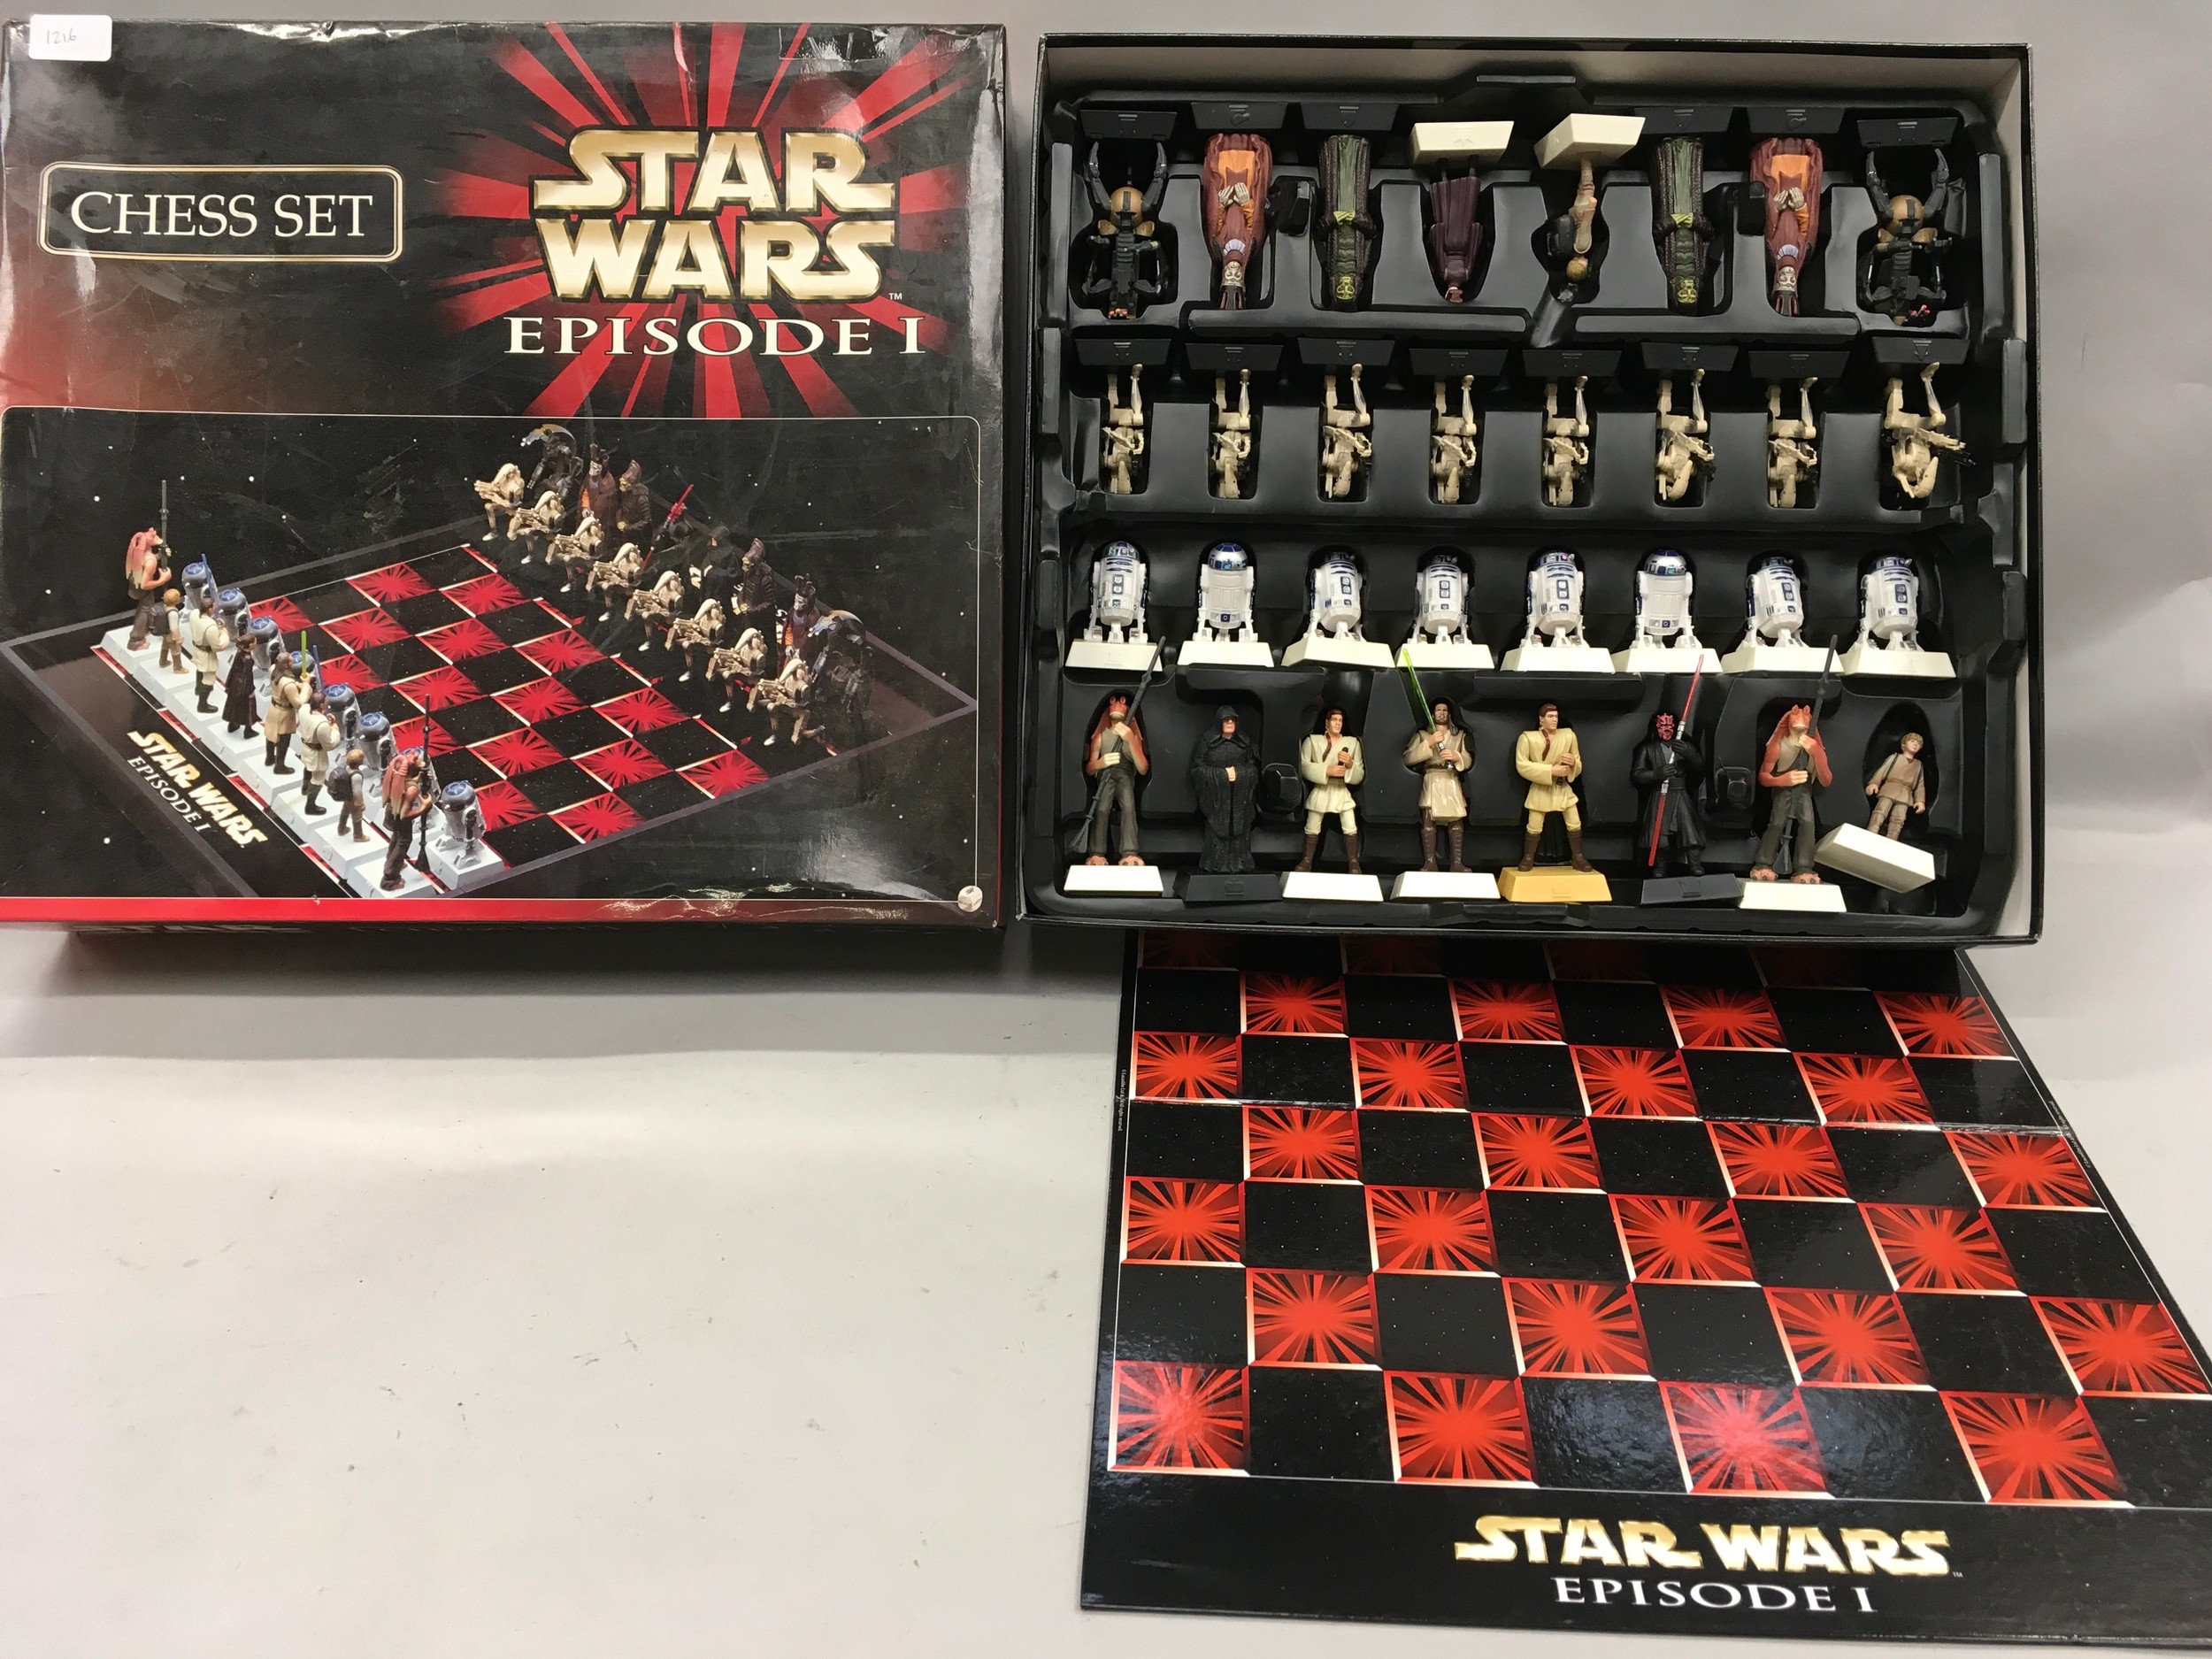 Star Wars Episode I chess set boxed.